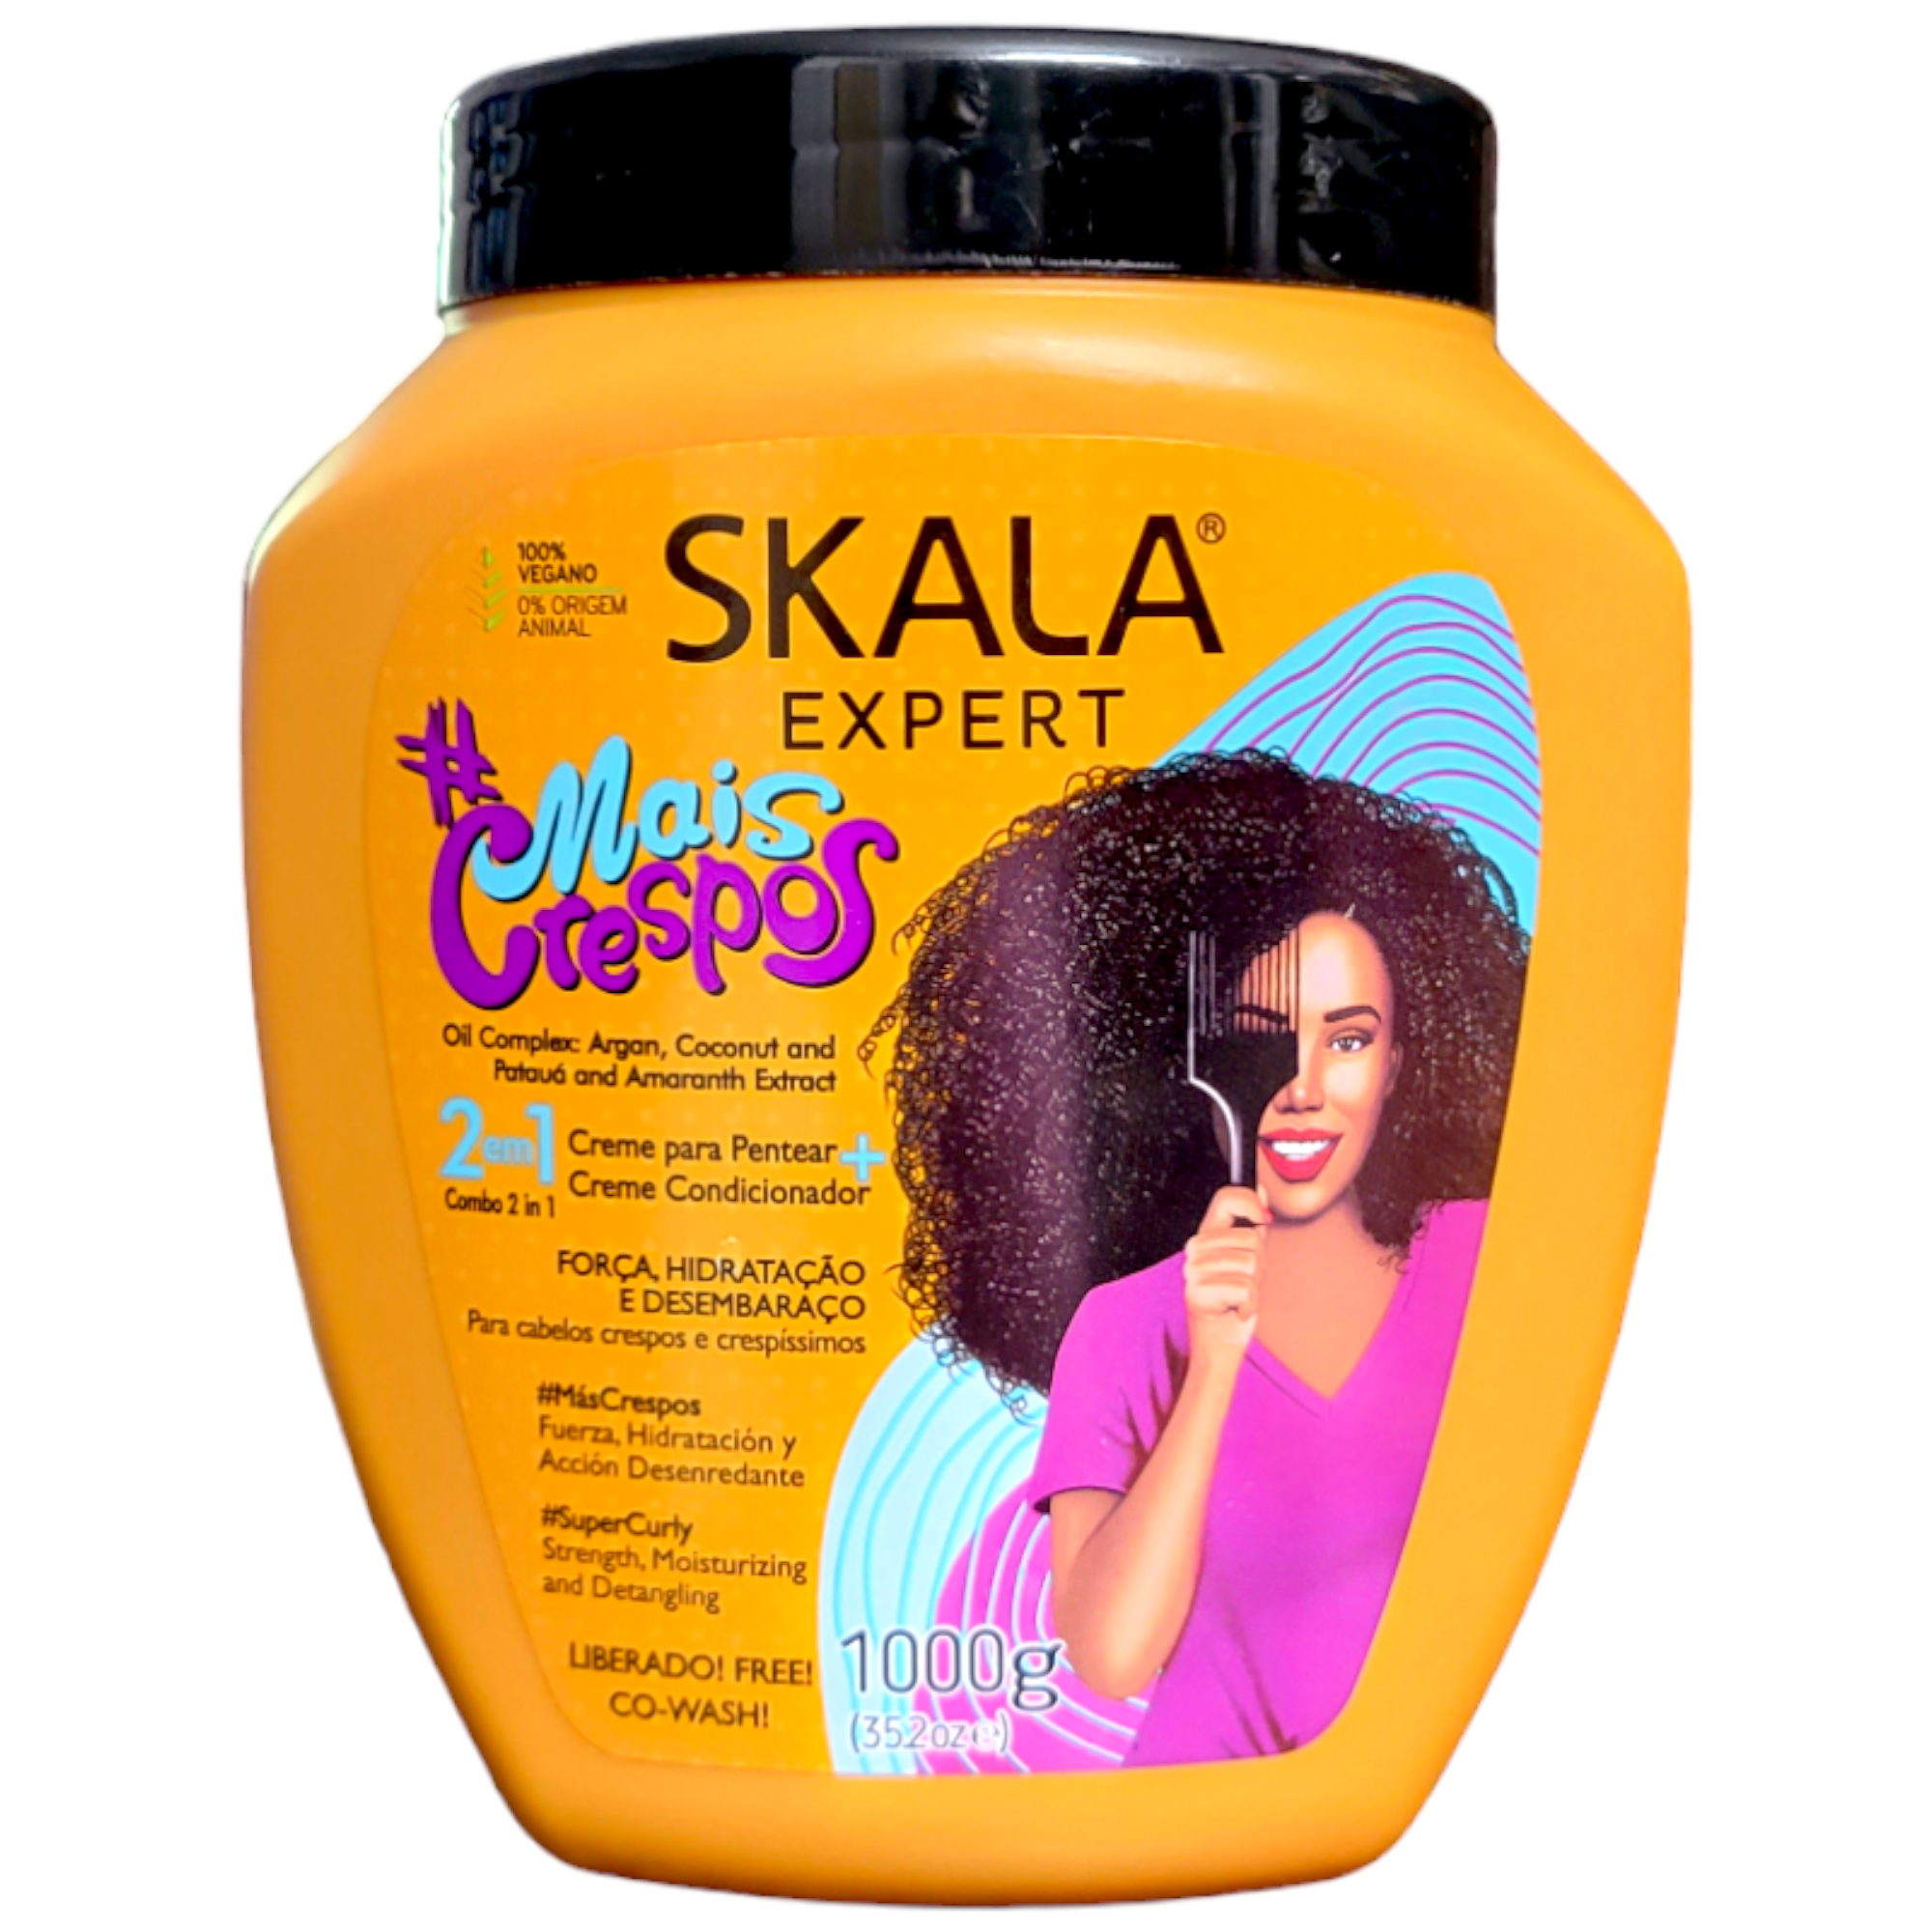 Skala Expert Mais Crespos Hair Treatment for Curly and Afro Hair: Perfect and Defined curls,Hydration and Softness in a Single Product - image 1 of 9